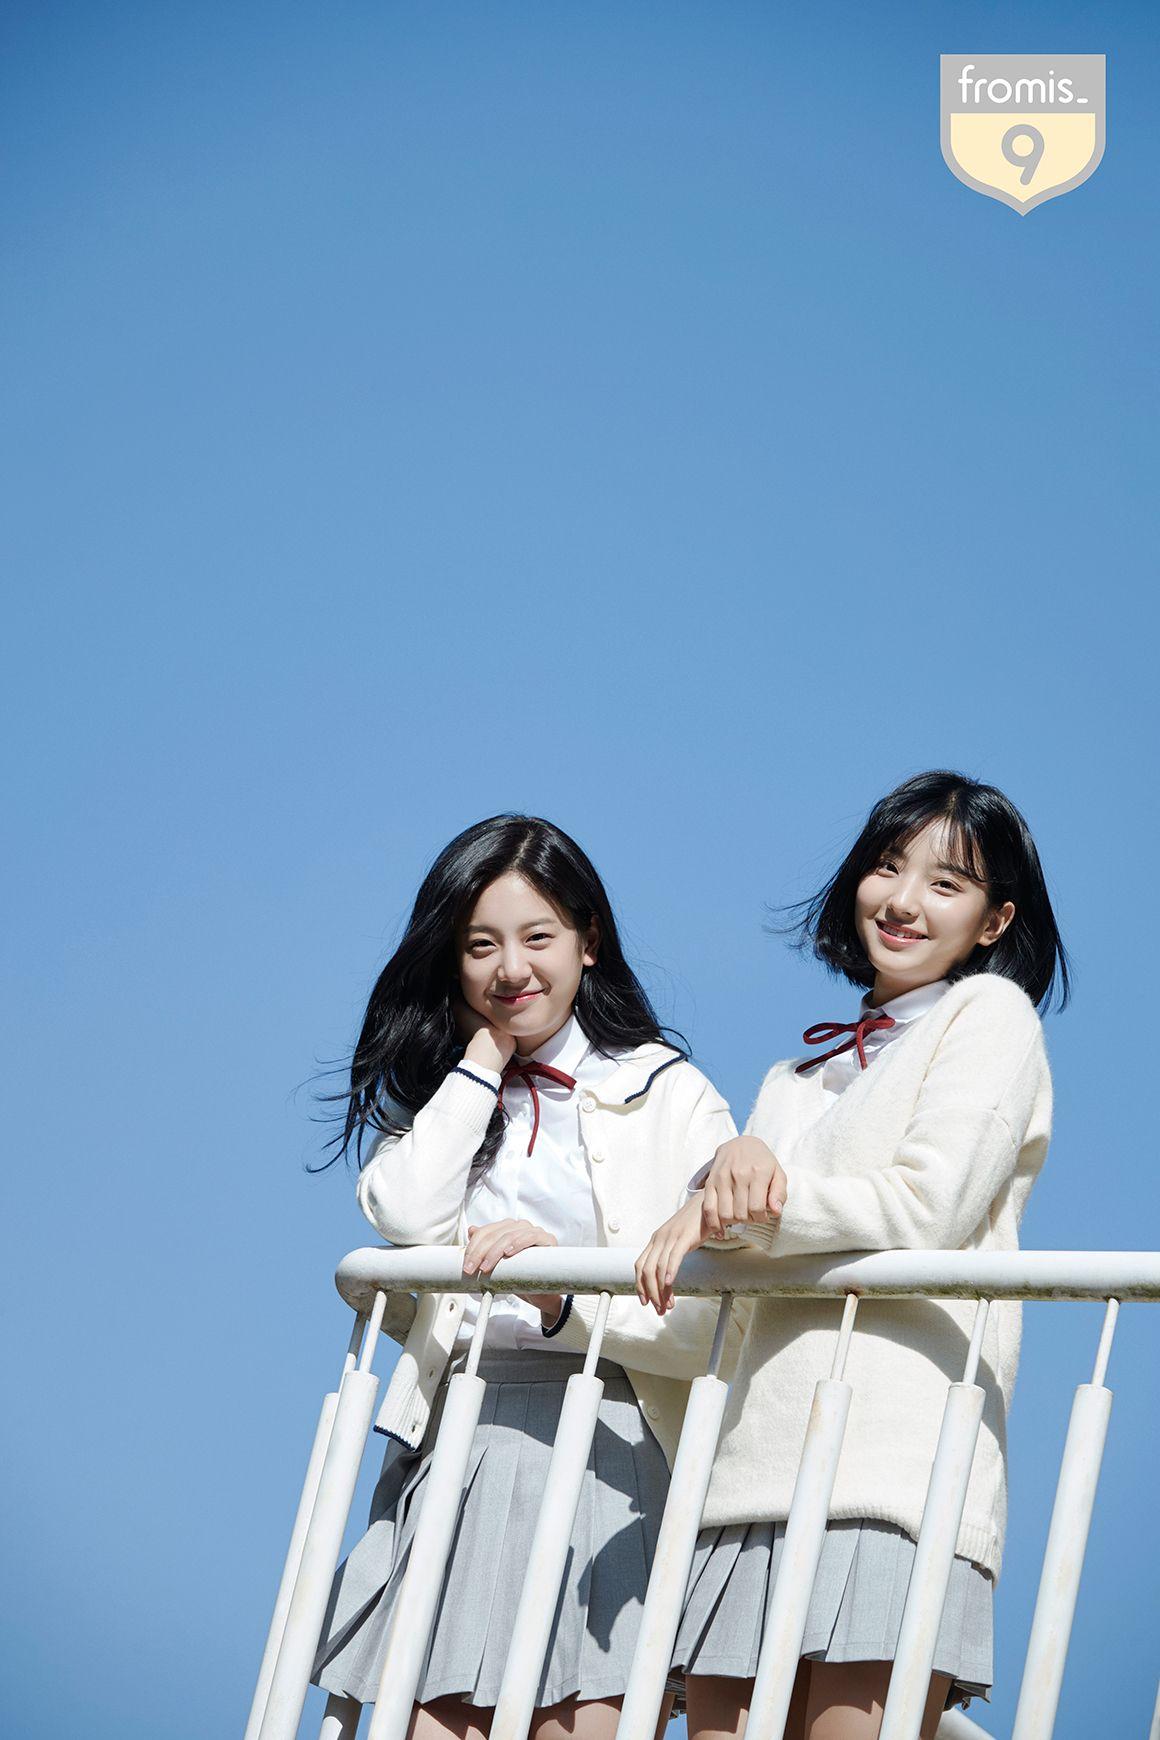 fromis_9 image Gyuri & Saerom HD wallpaper and background photo